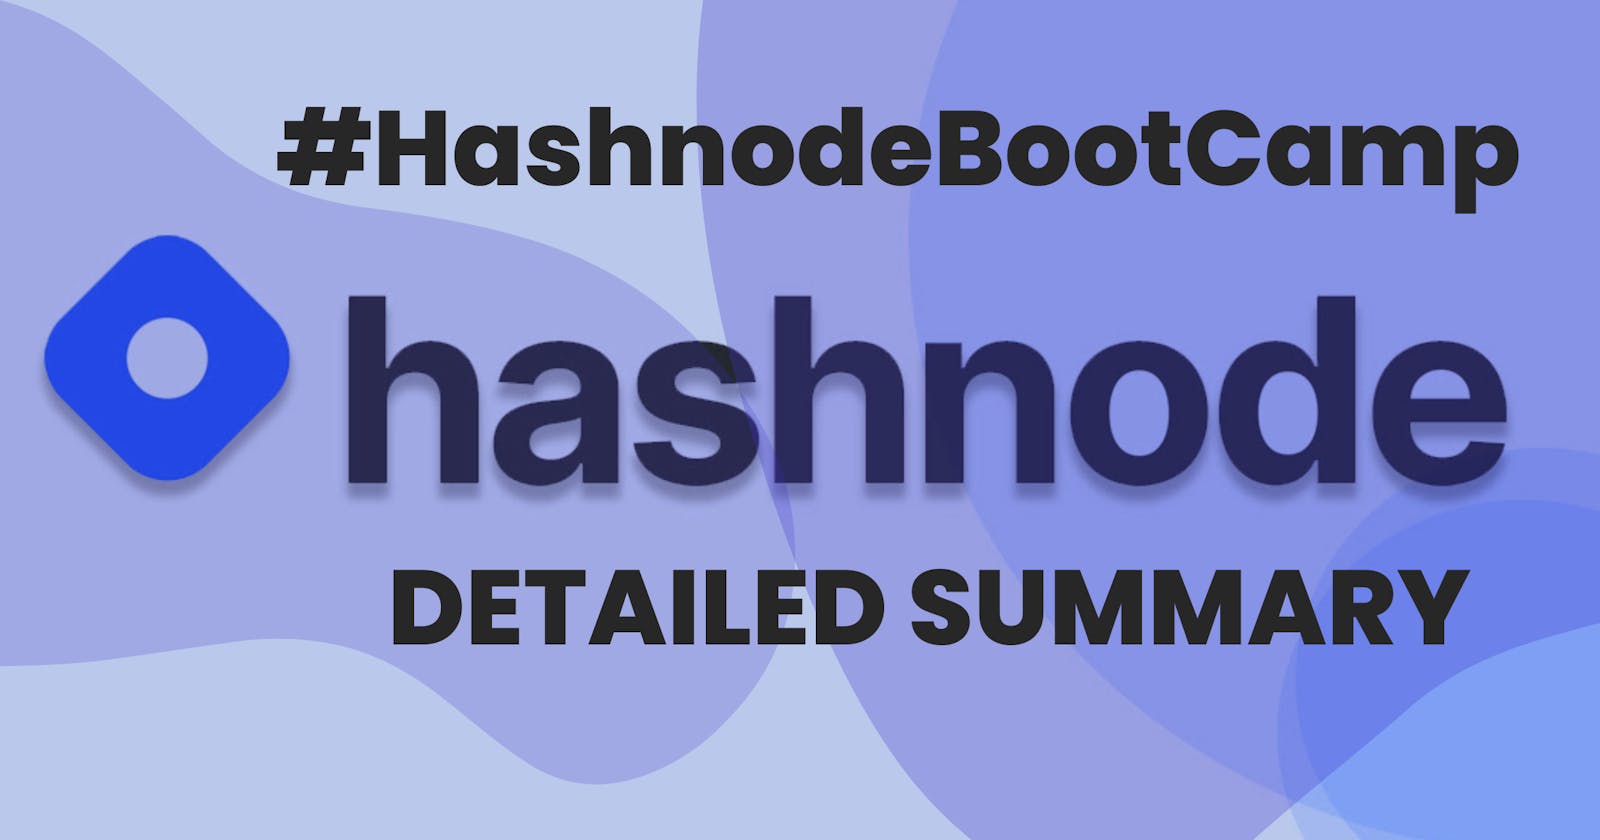 Hashnode BootCamp: Insights on Leveraging Technical Writing: A Three-Day Bootcamp Summary